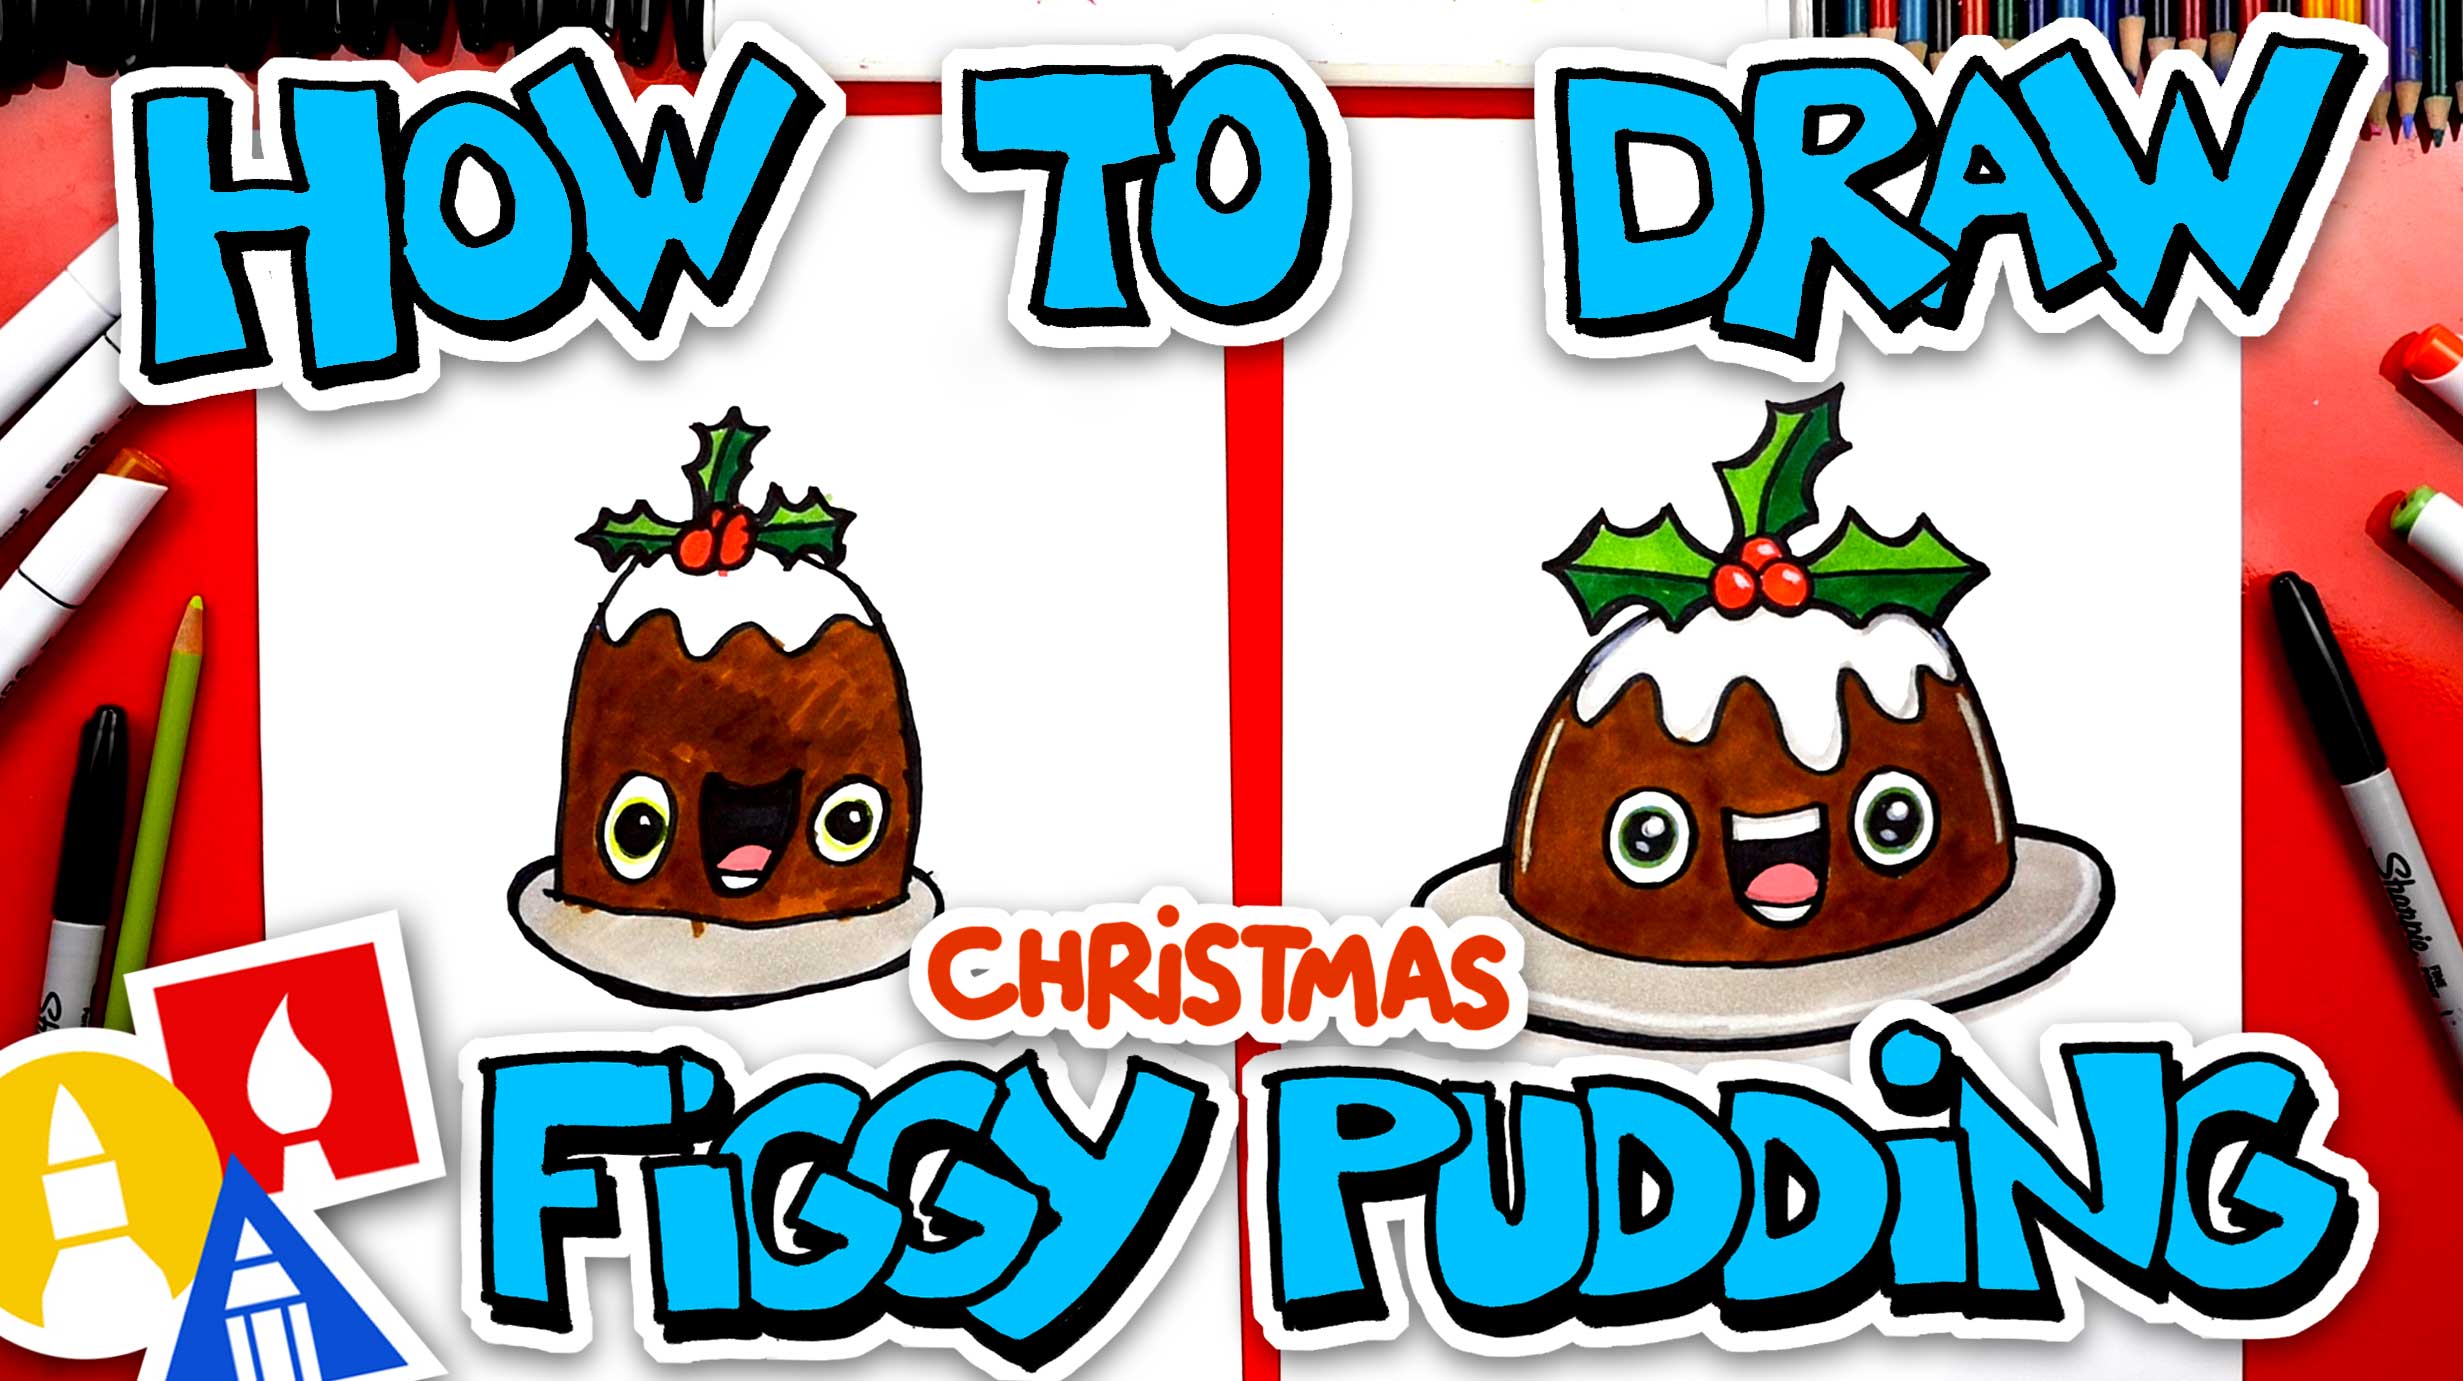 How To Draw Funny Figgy Pudding For Christmas - Art For Kids Hub